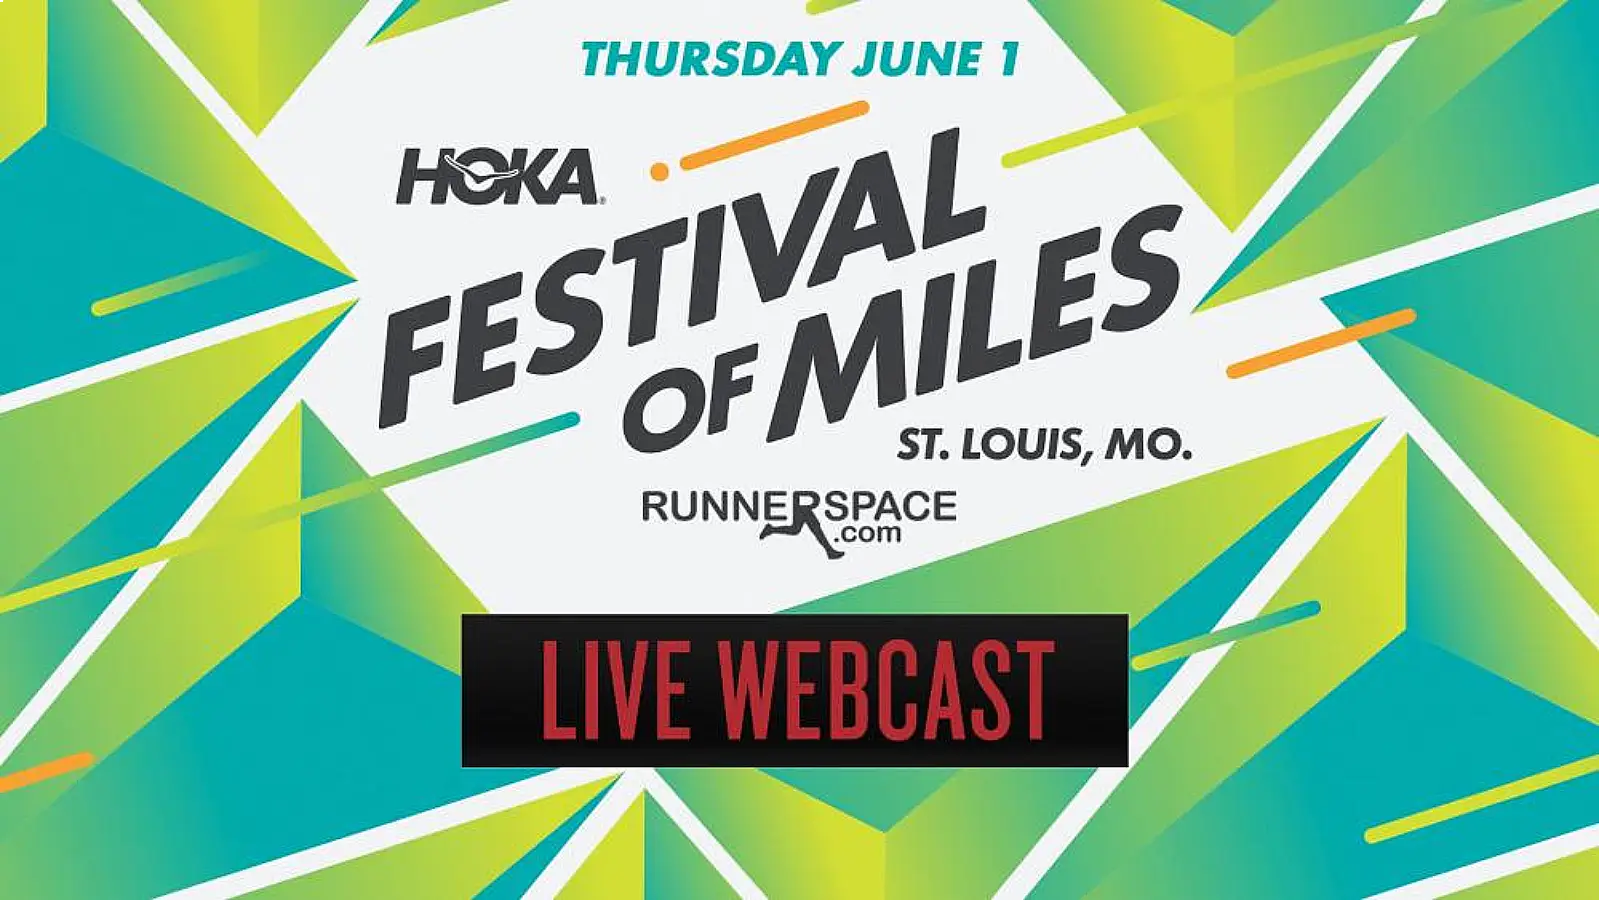 How to watch the HOKA Festival of Miles 2023 for free?